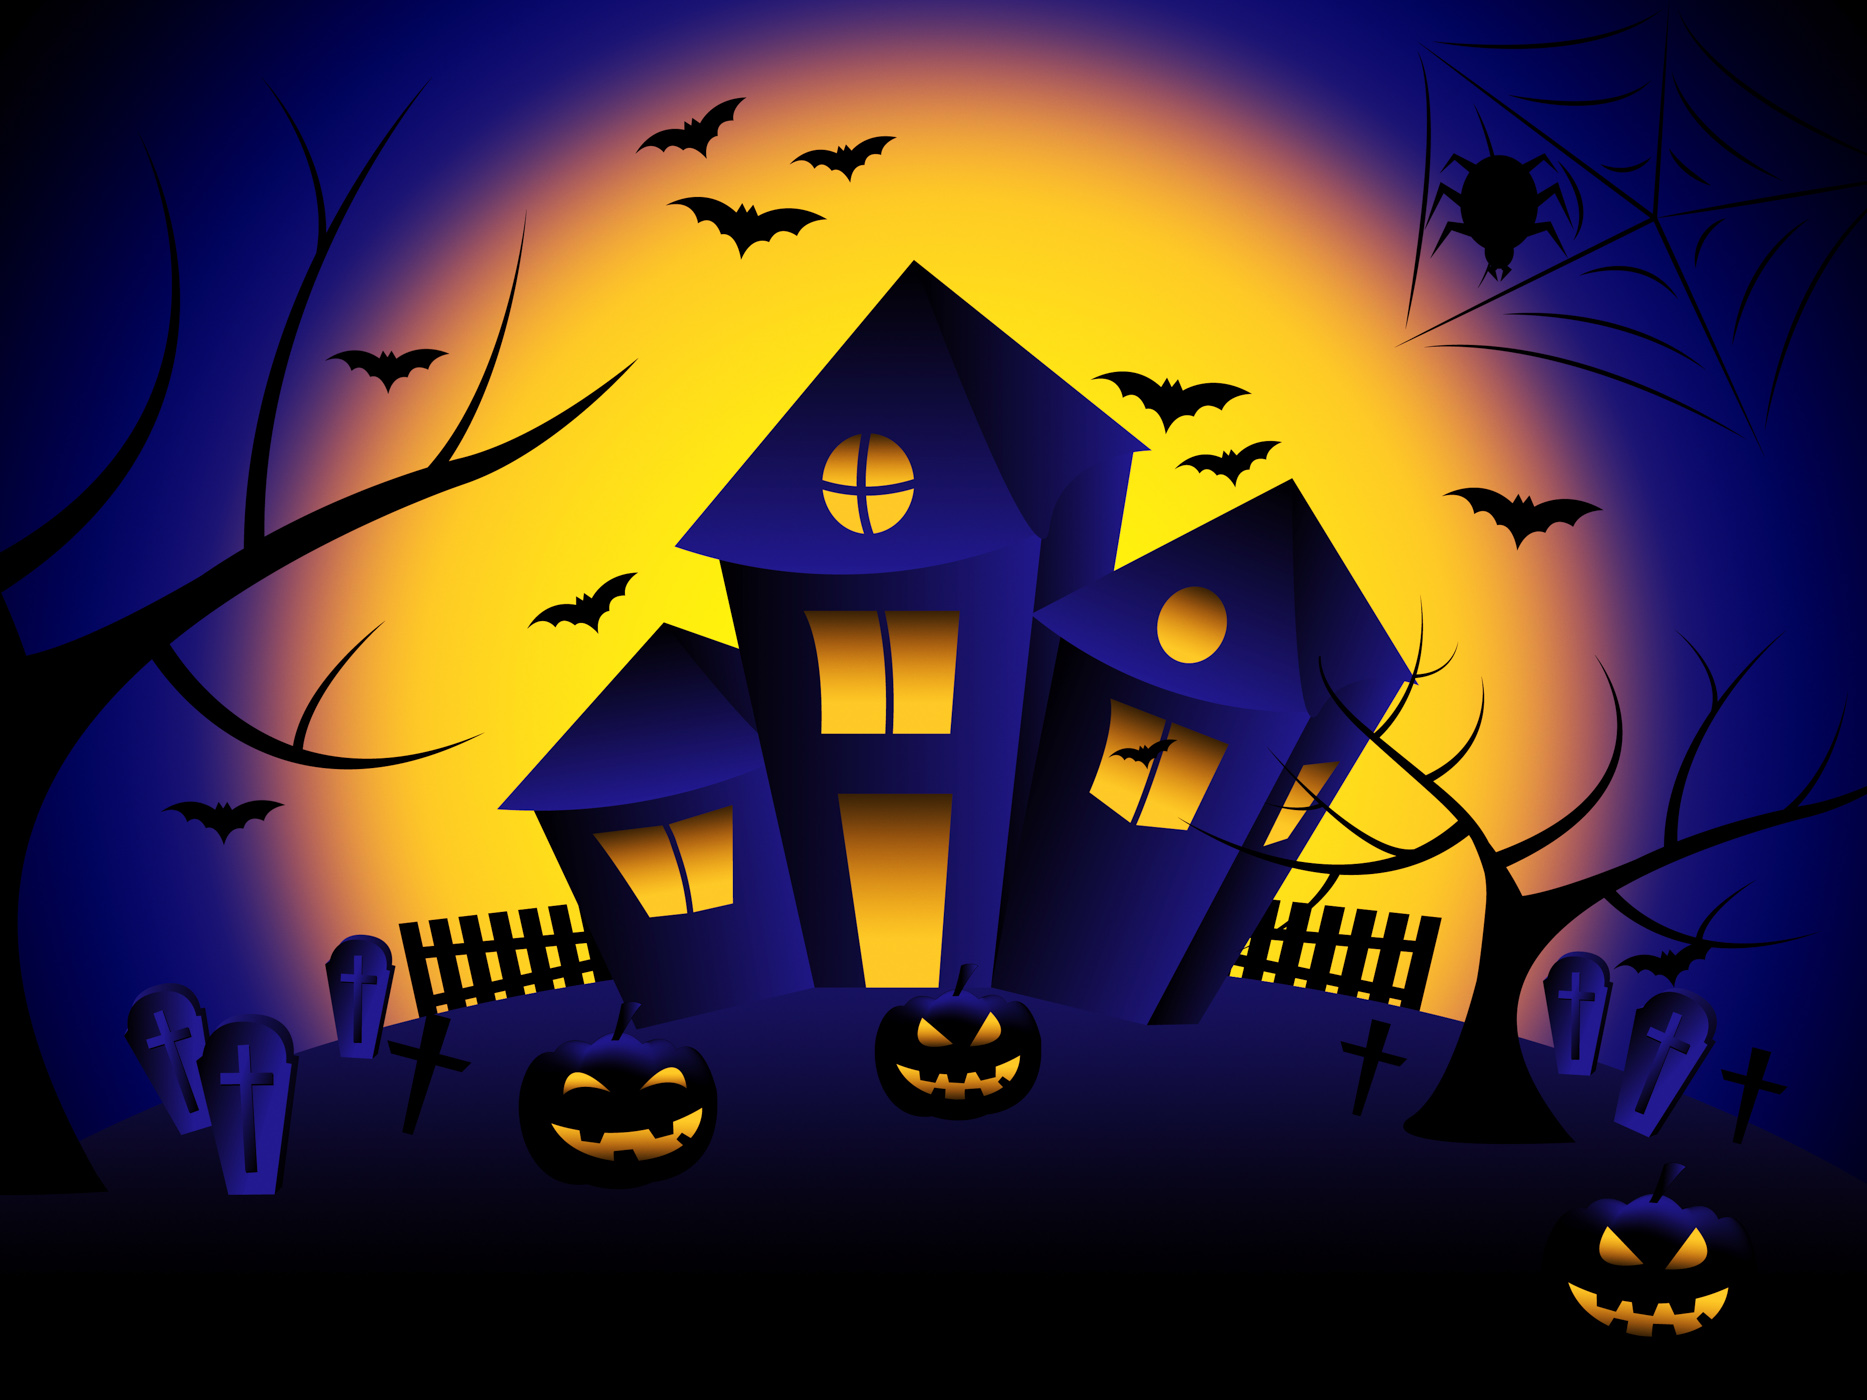 Haunted house means trick or treat and autumn photo